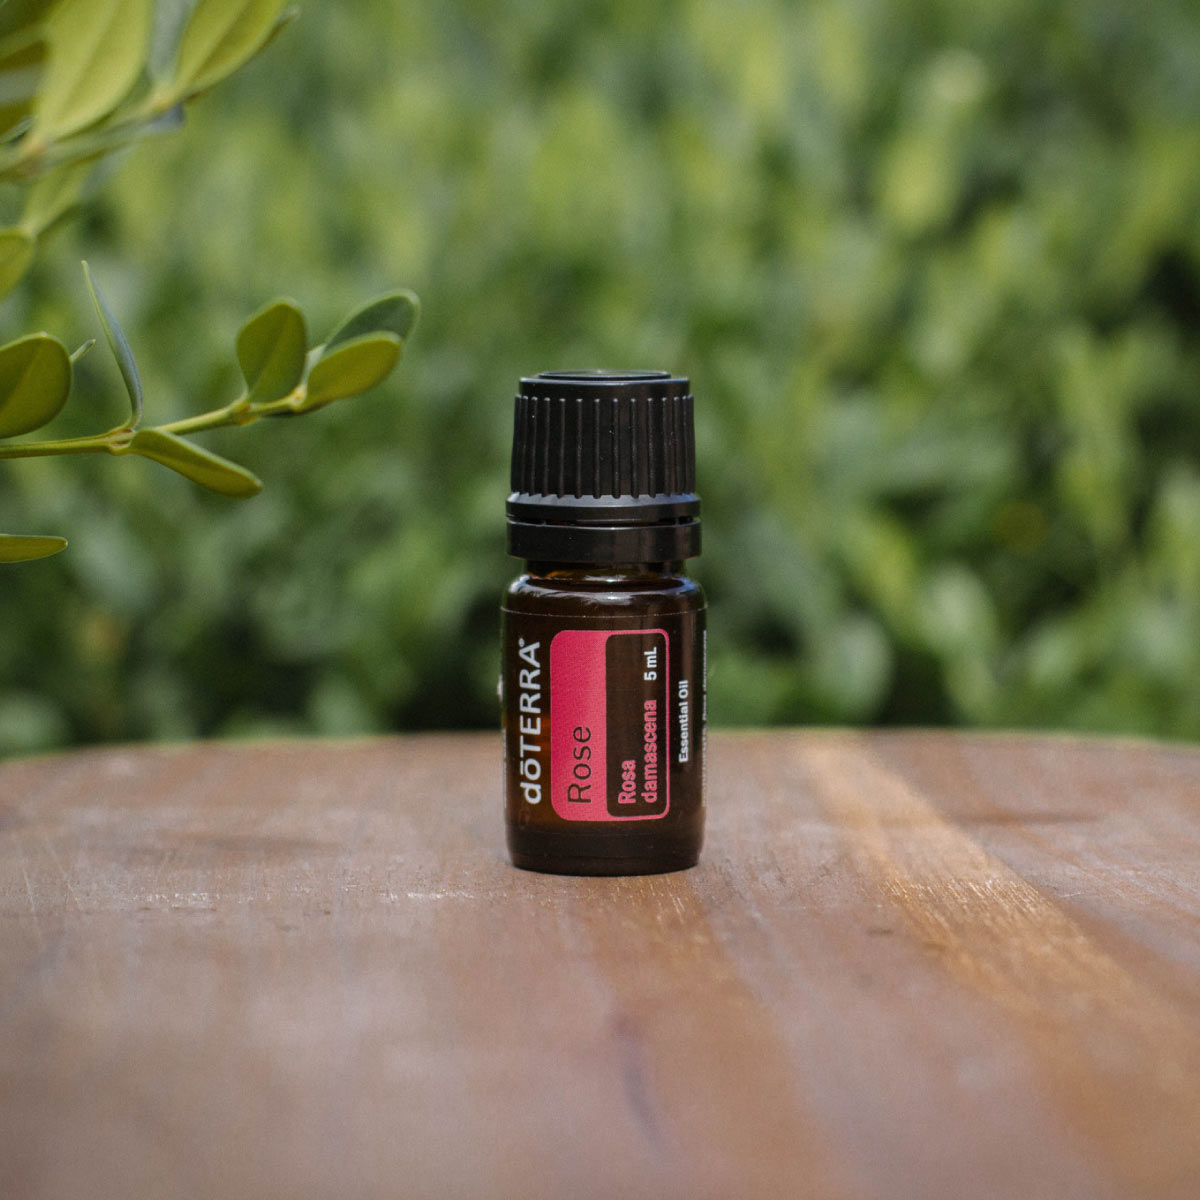 Bottle of Rose oil on a wooden surface with green leaves in the background. What is Rose oil good for? Rose essential oil is good for skin and can be used as a personal fragrance. 